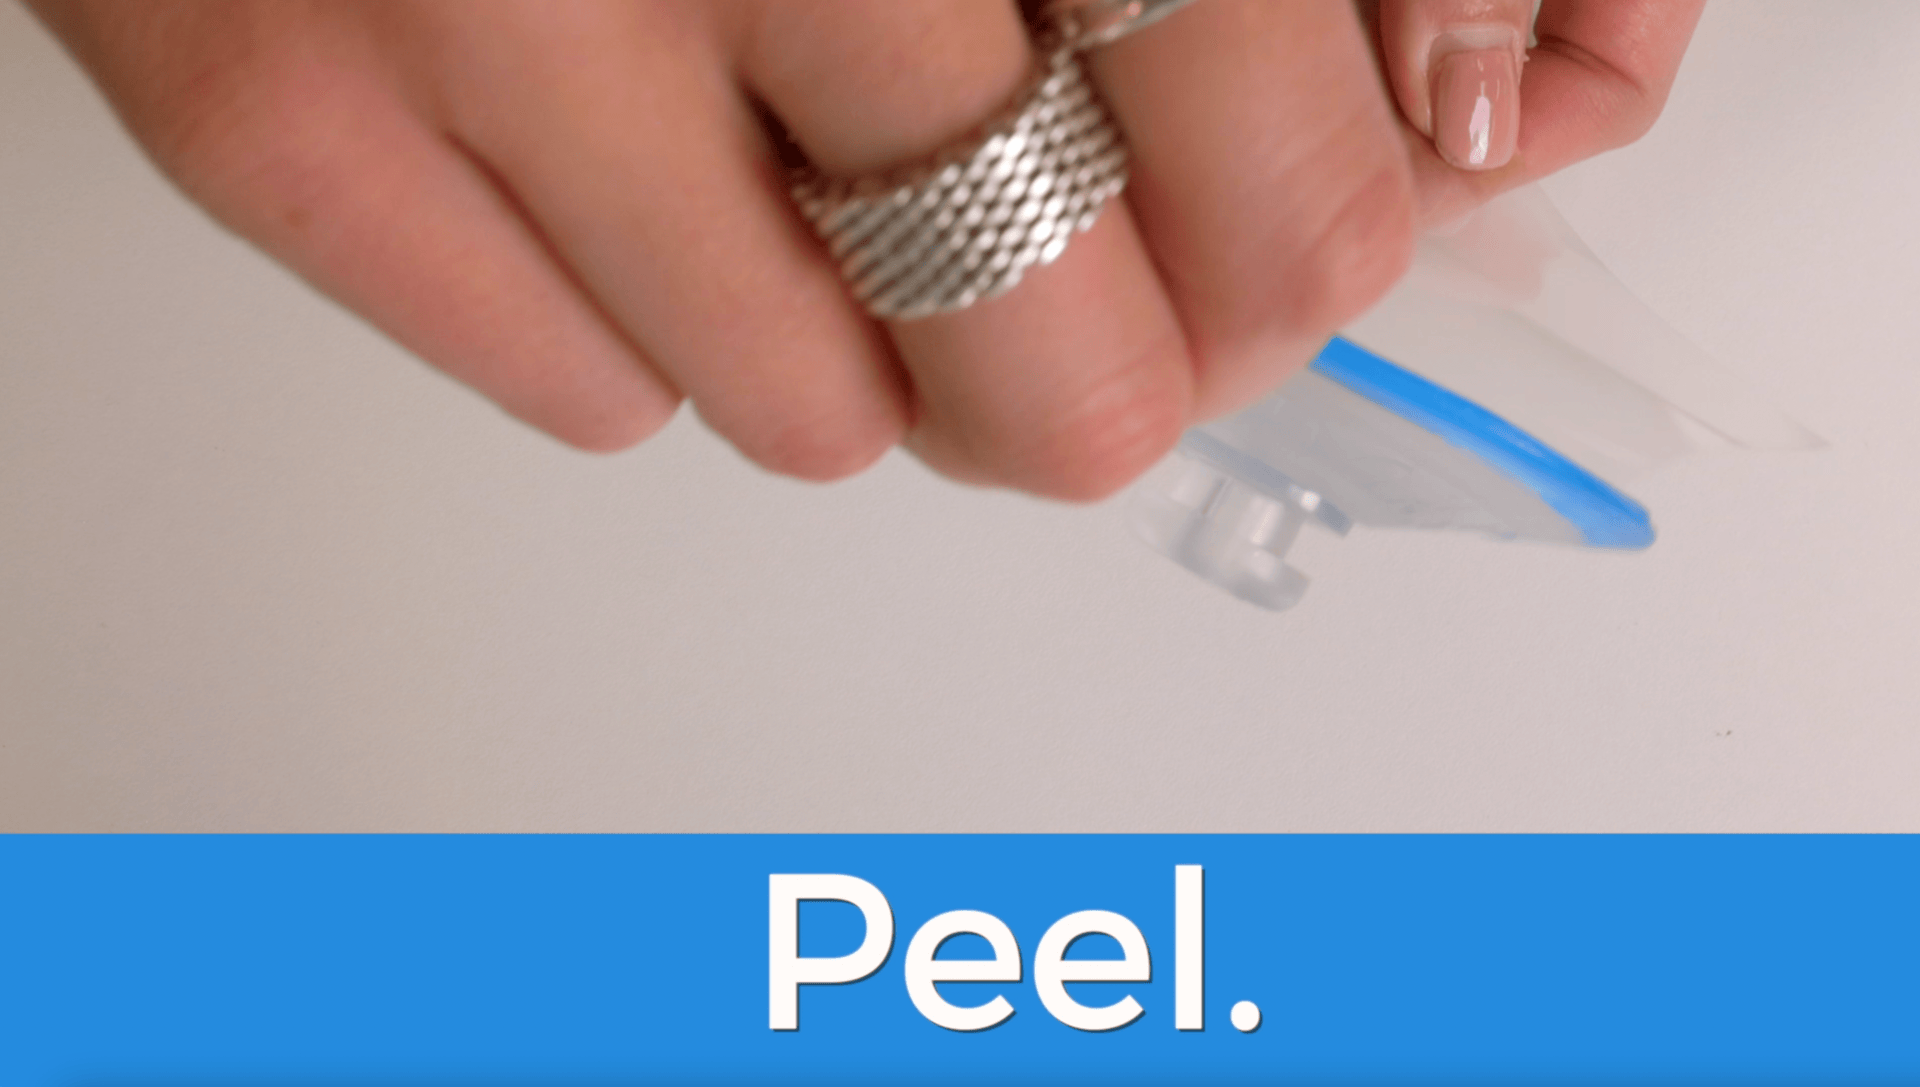 1. Peel Off The Suction Cup.